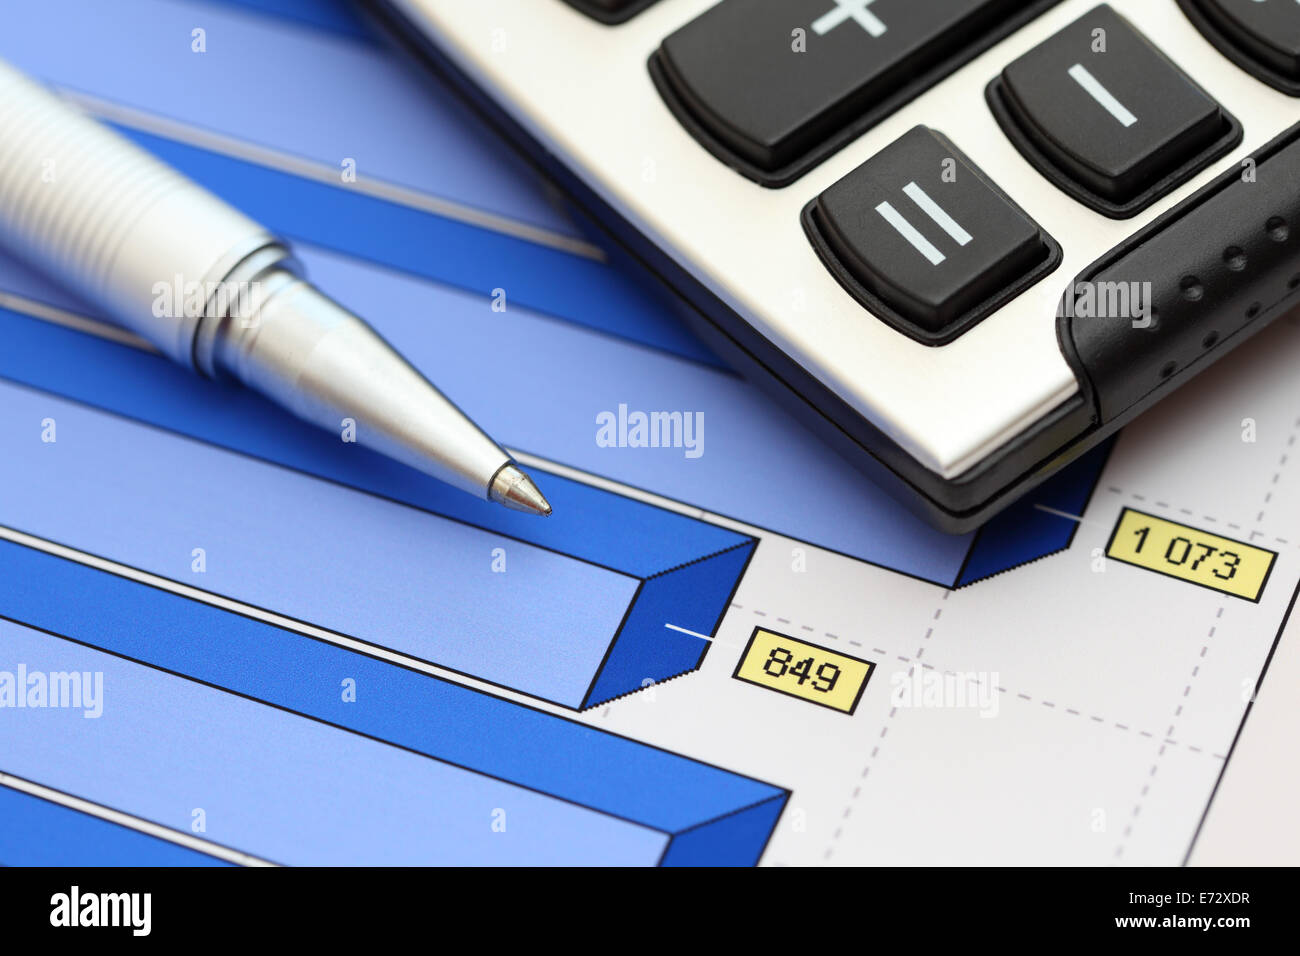 Financial statements. Business Graph. ballpoint pen and calculator on a financial chart or Stock Market Data. Stock Photo